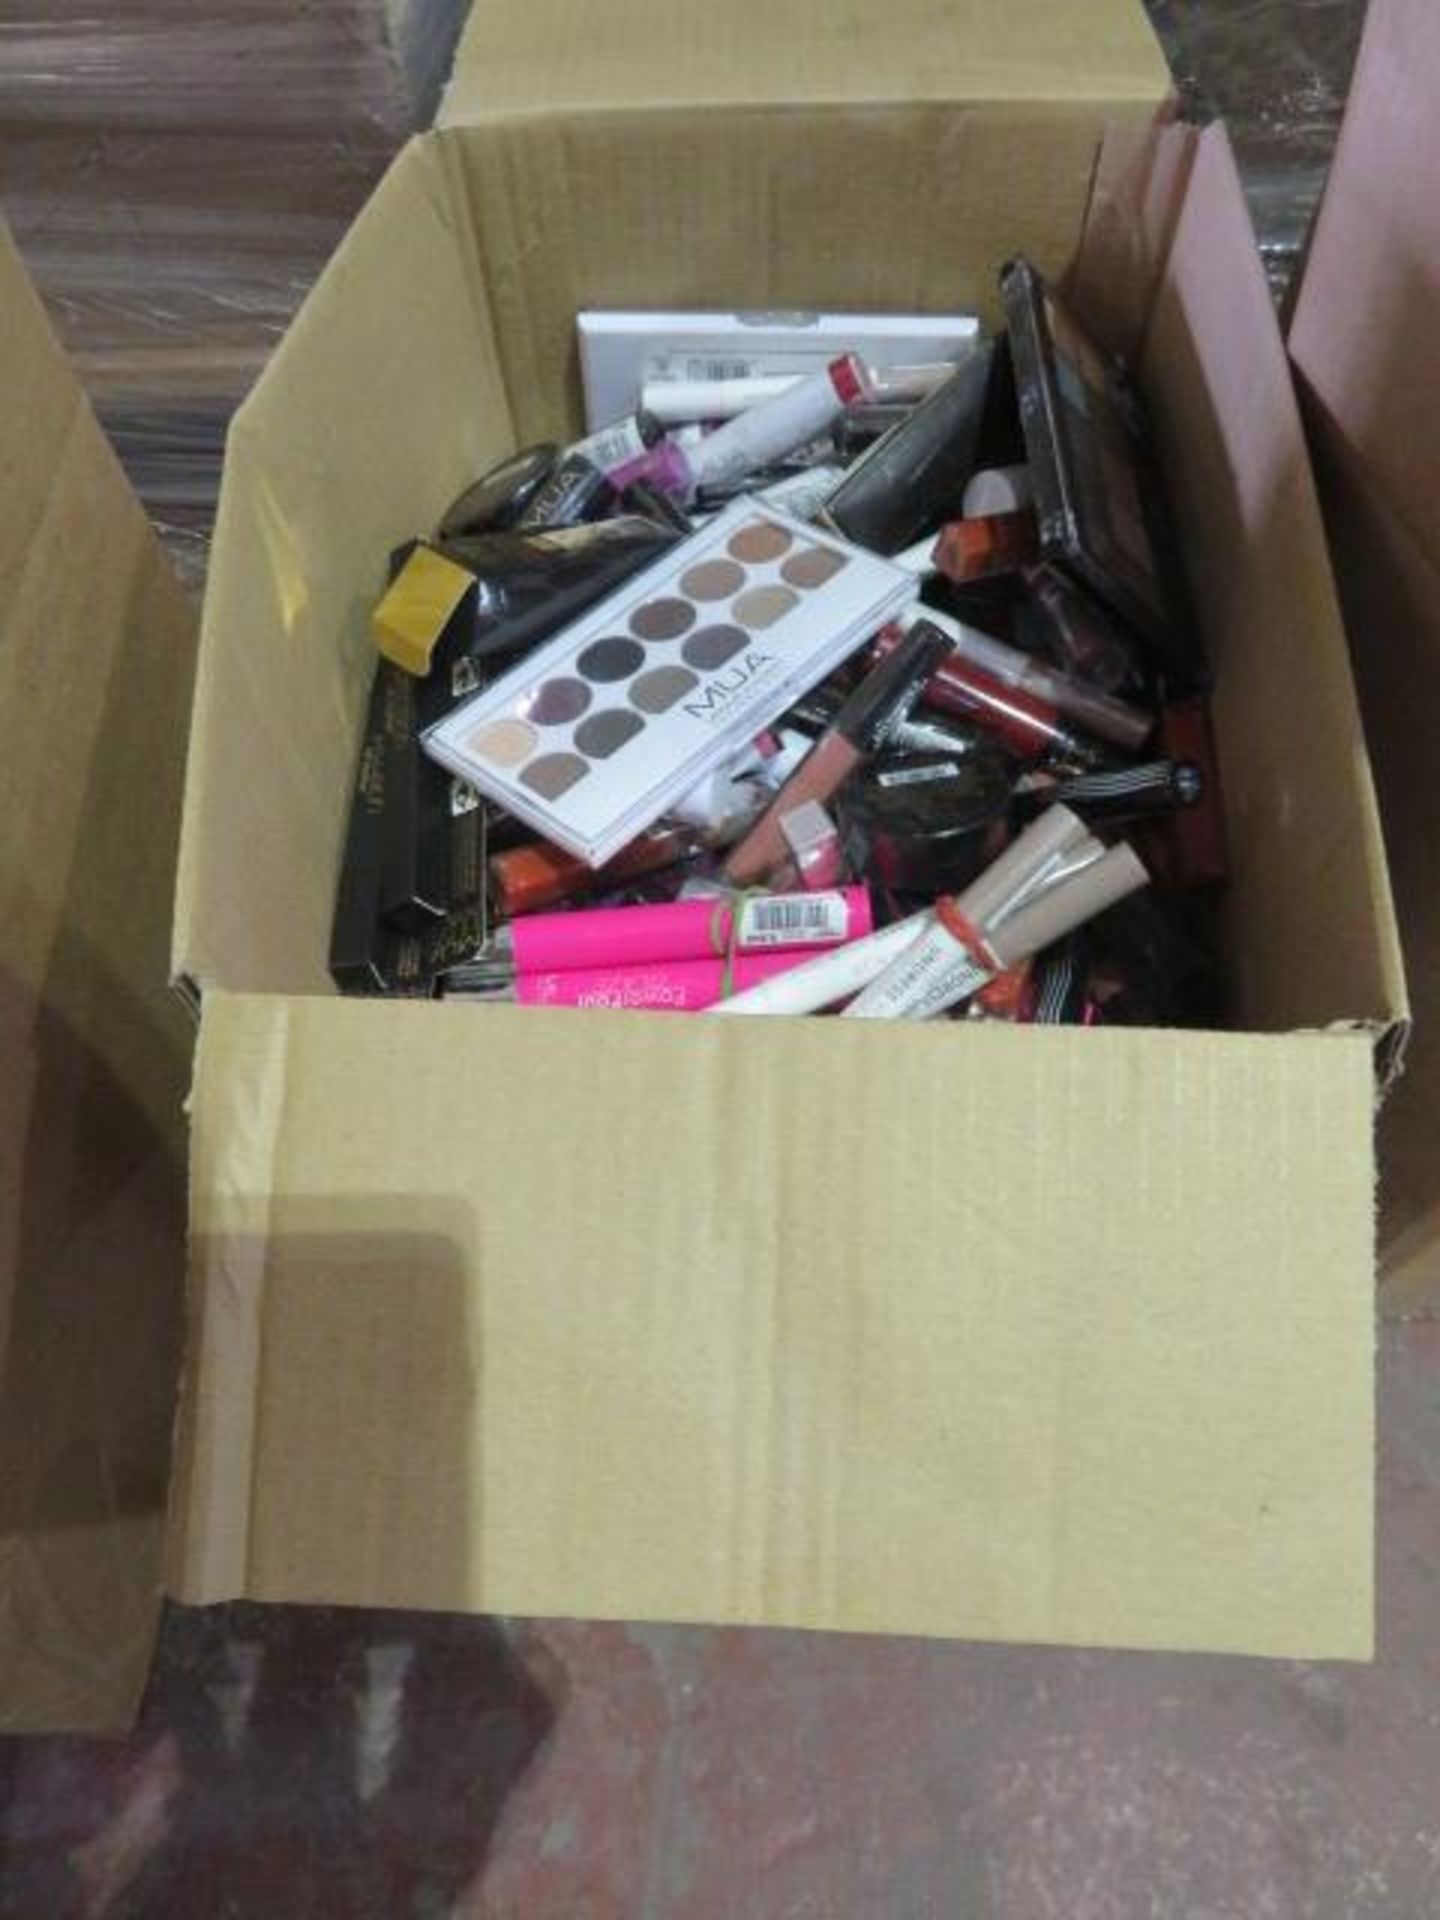 (Z13) Circa. 200 items of various new make up acadamy make up to include: lipstick, power brow ... - Image 2 of 3